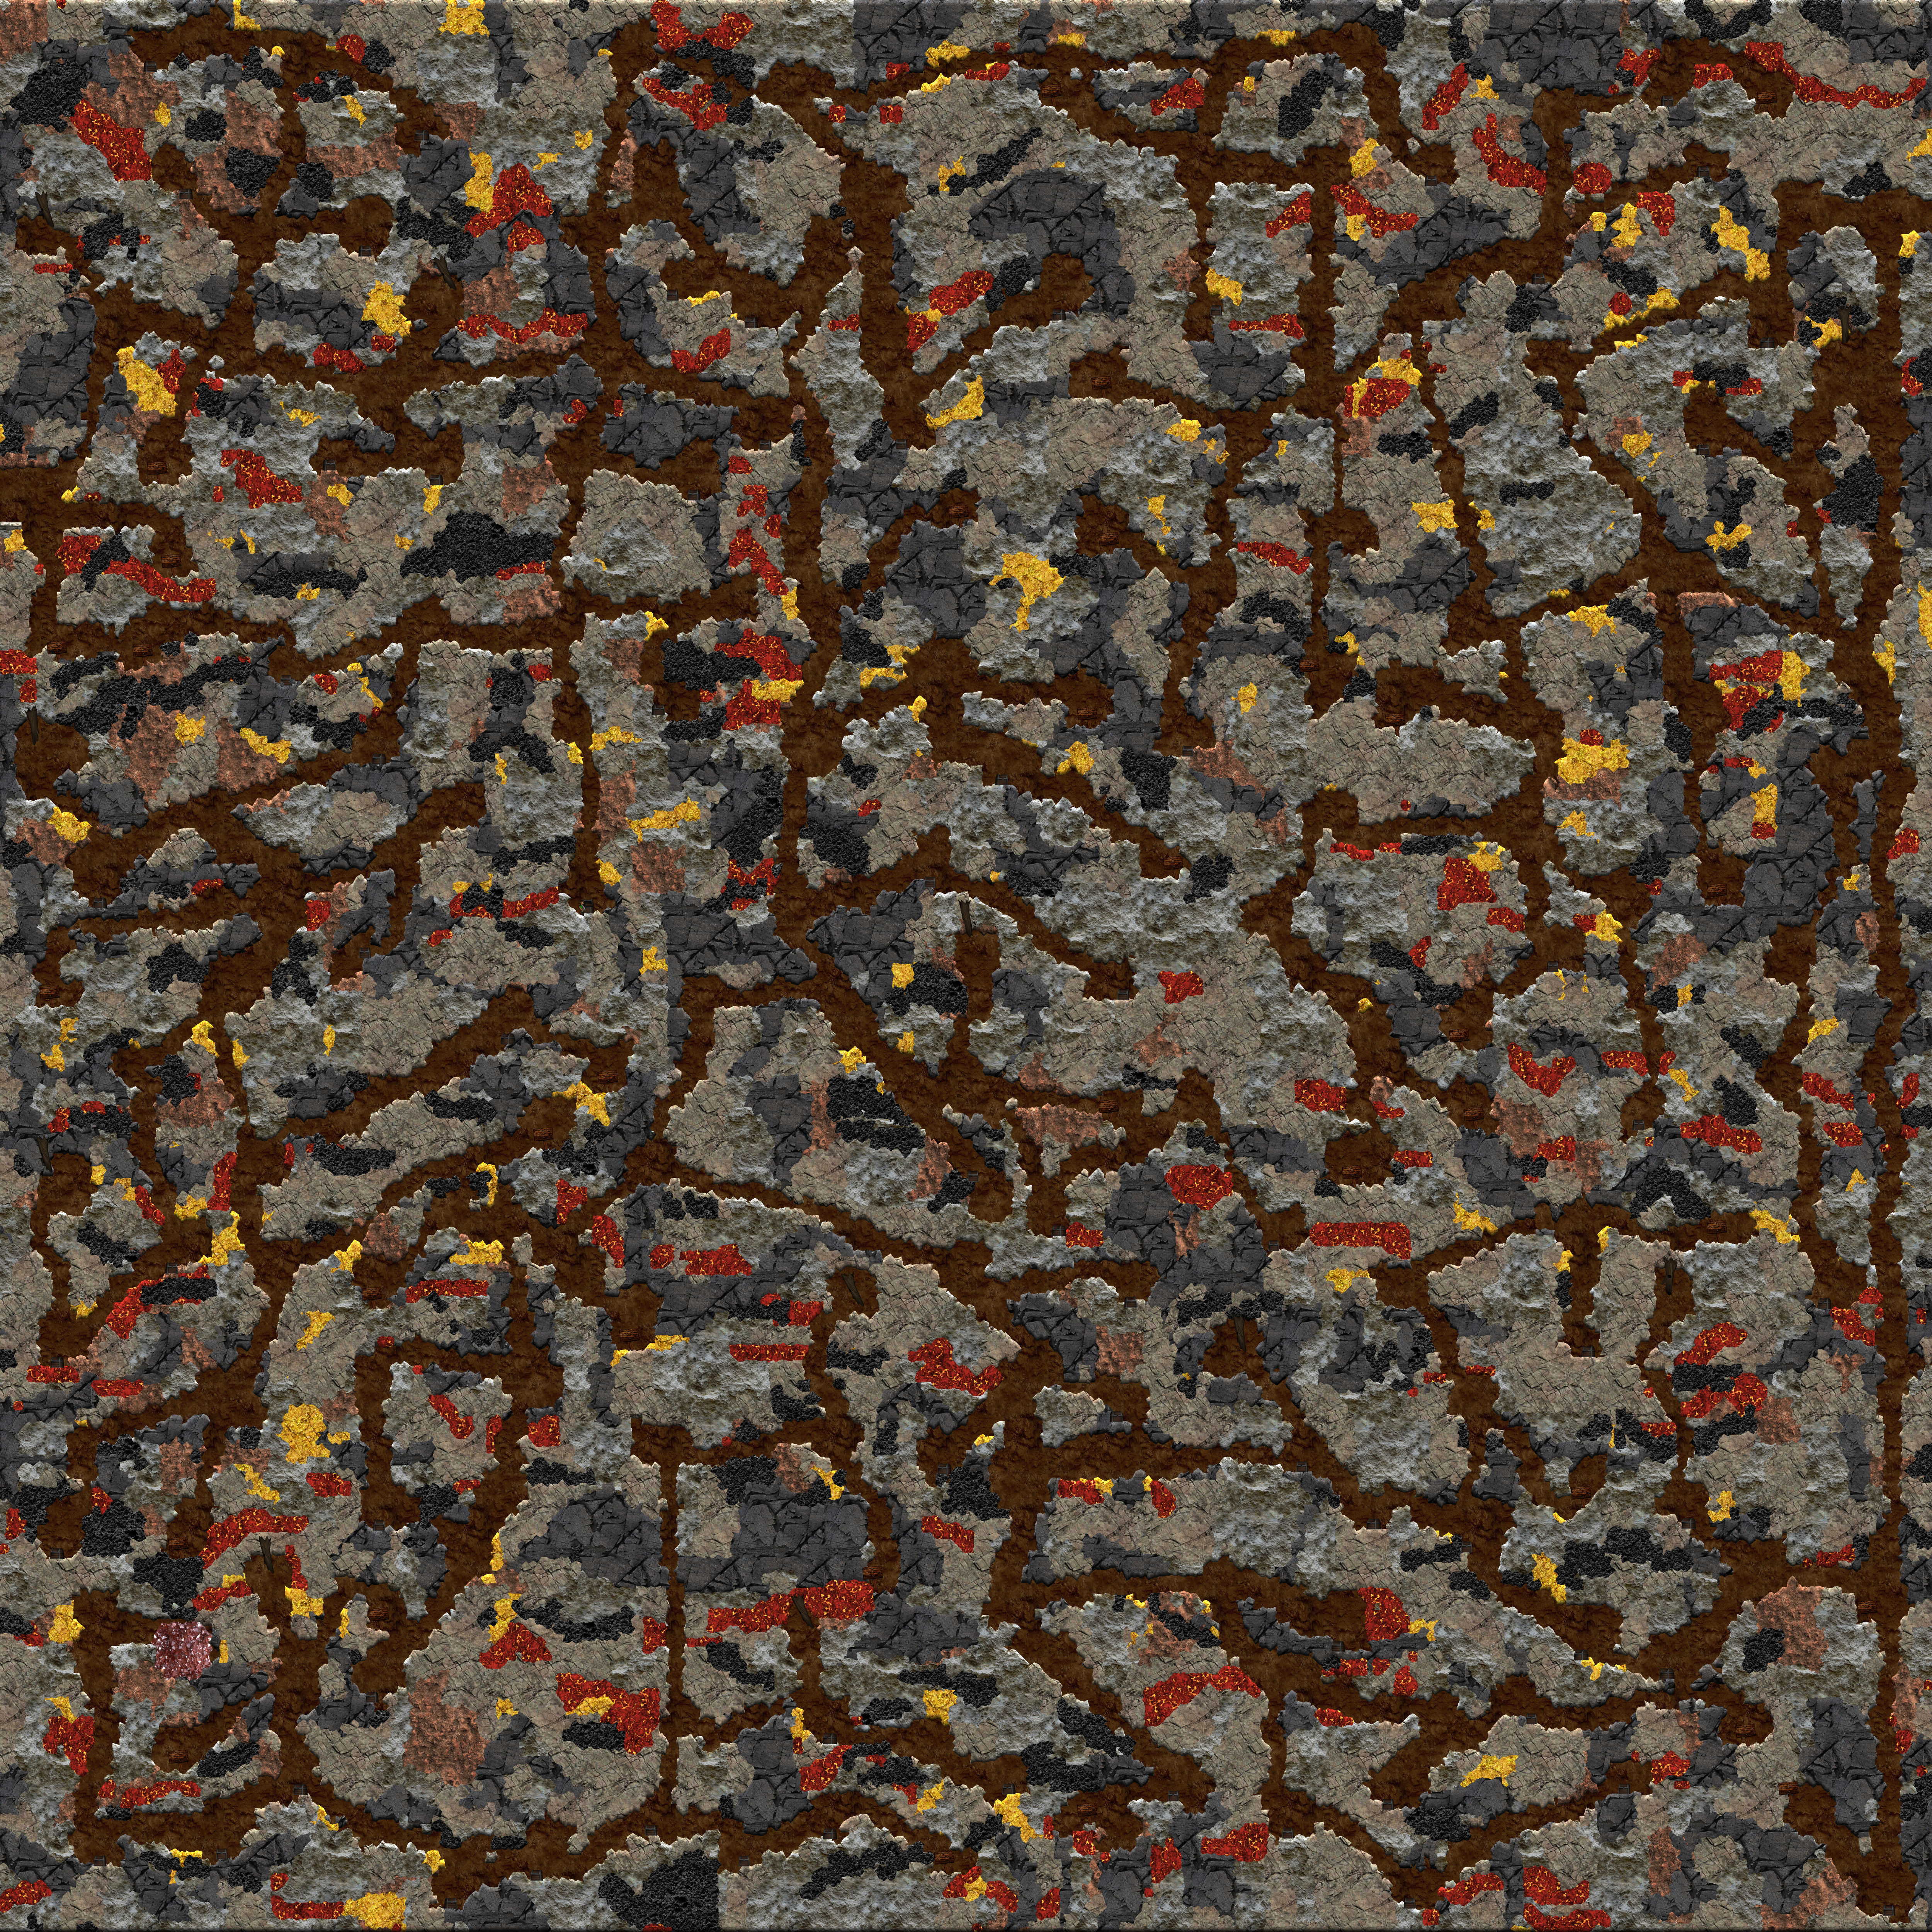 A complex maze generated by the dynamic landscape generator. Can you spot the clonk? :)